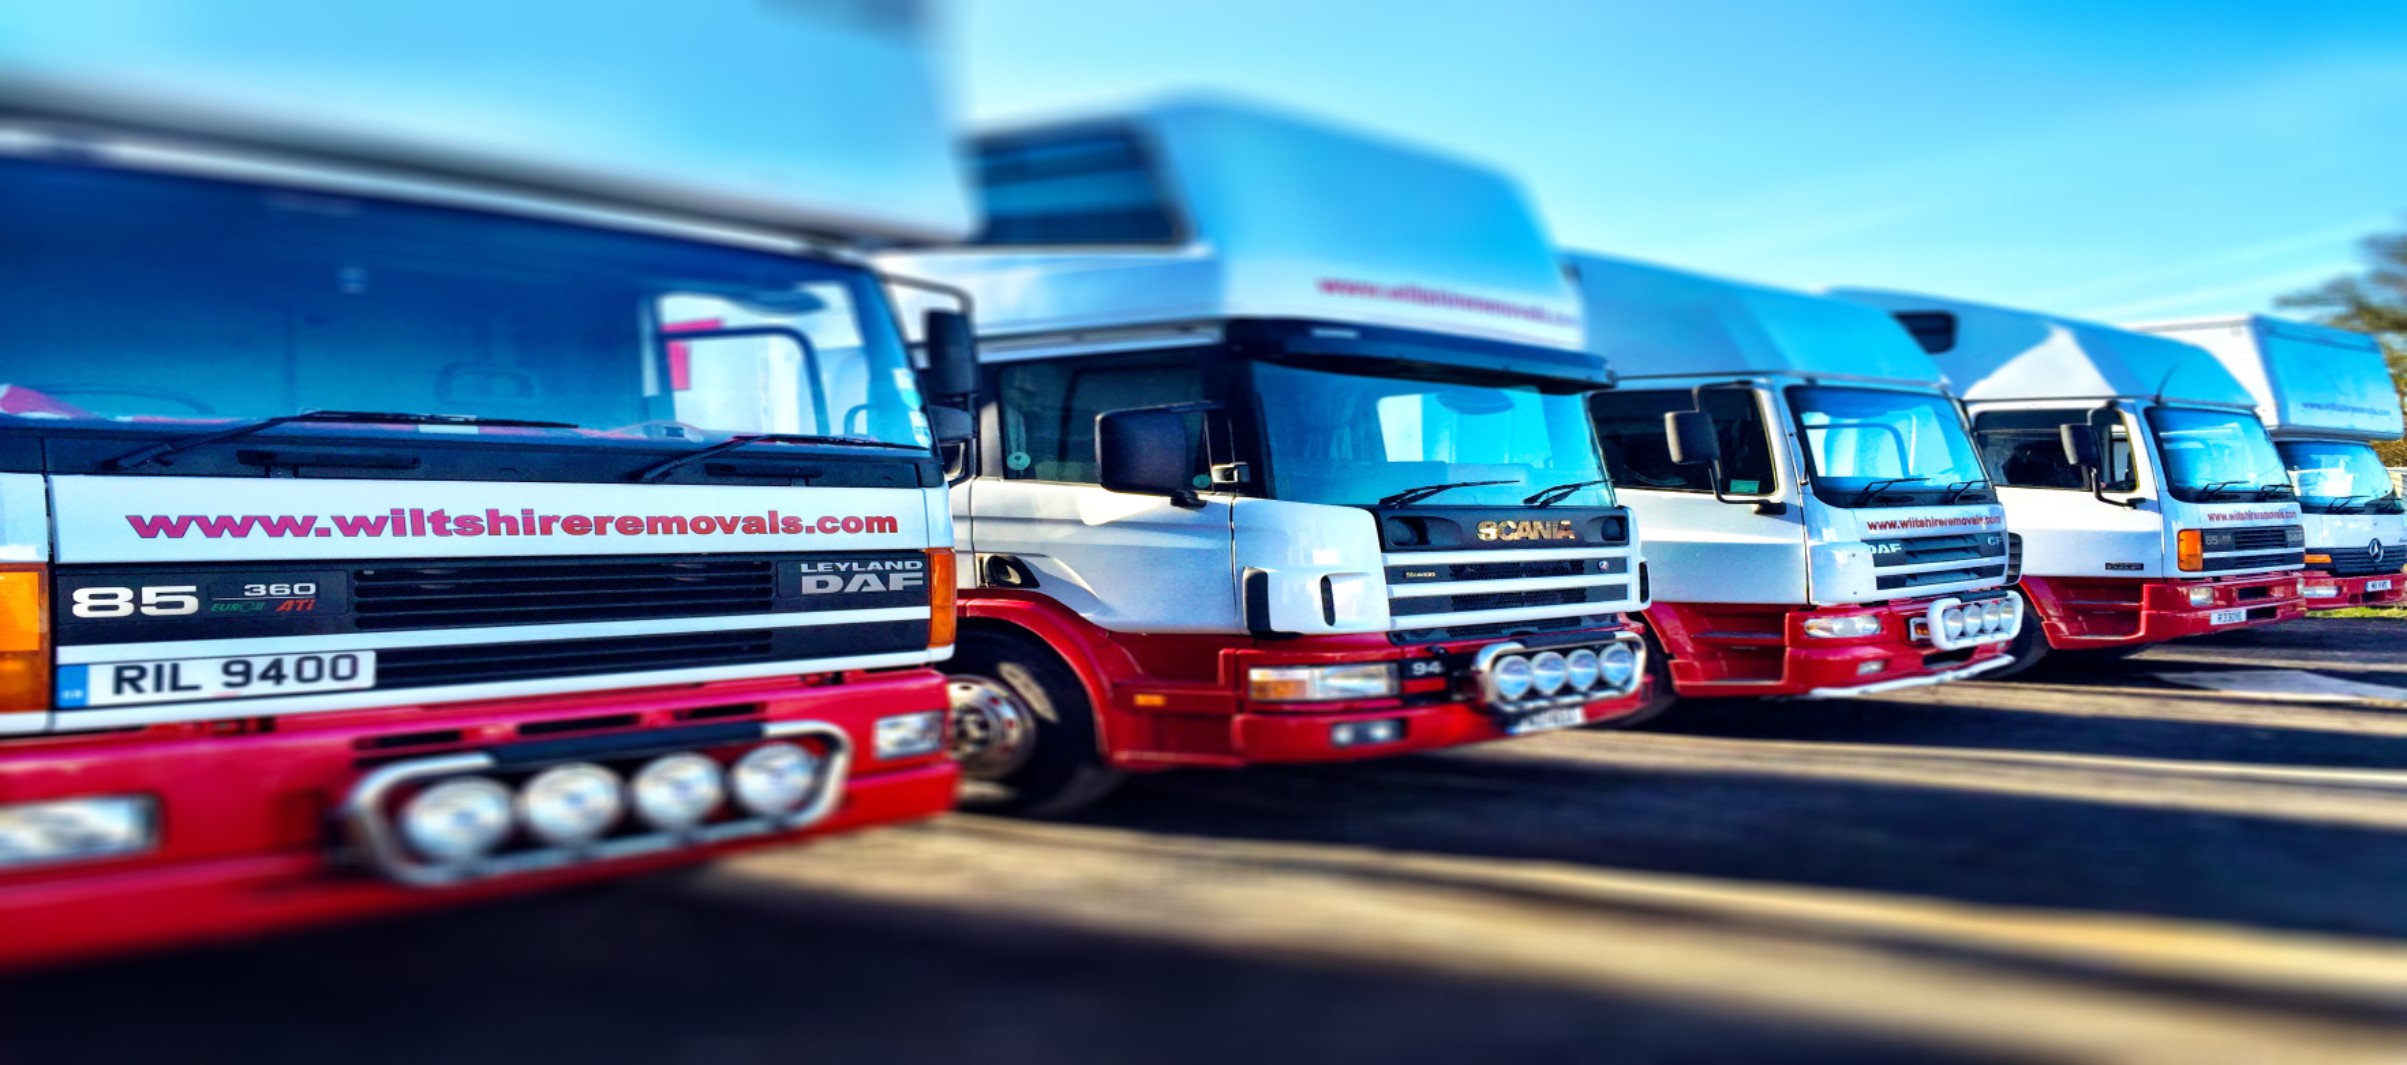   A Large &amp; Immaculate Fleet, Fit For Any Job  